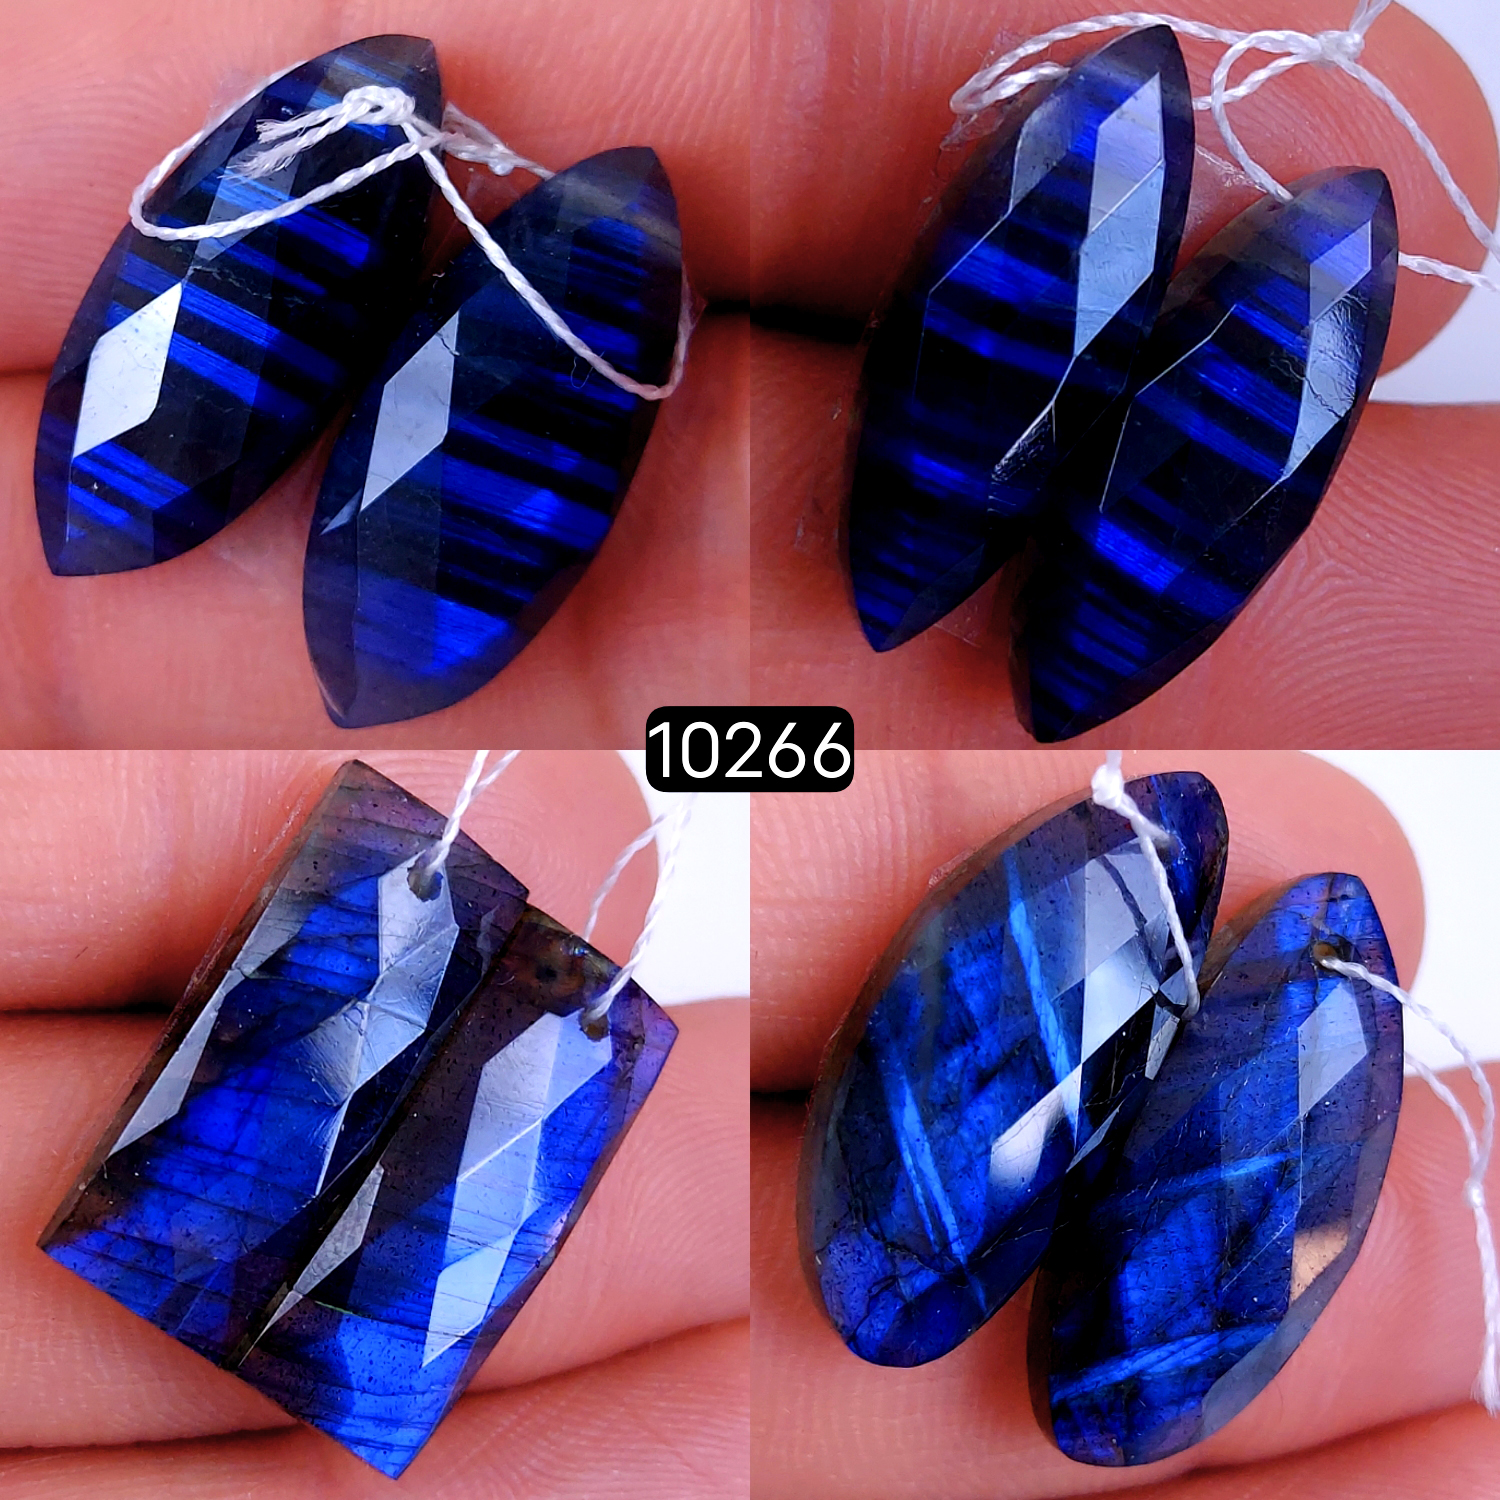 4Pair 83Cts Natural Labradorite Faceted Crystal Drill Dangle Drop Earring Pairs Silver Earrings Rose cut Labradorite Hoop Jewelry  26X12 22X8mm #10266